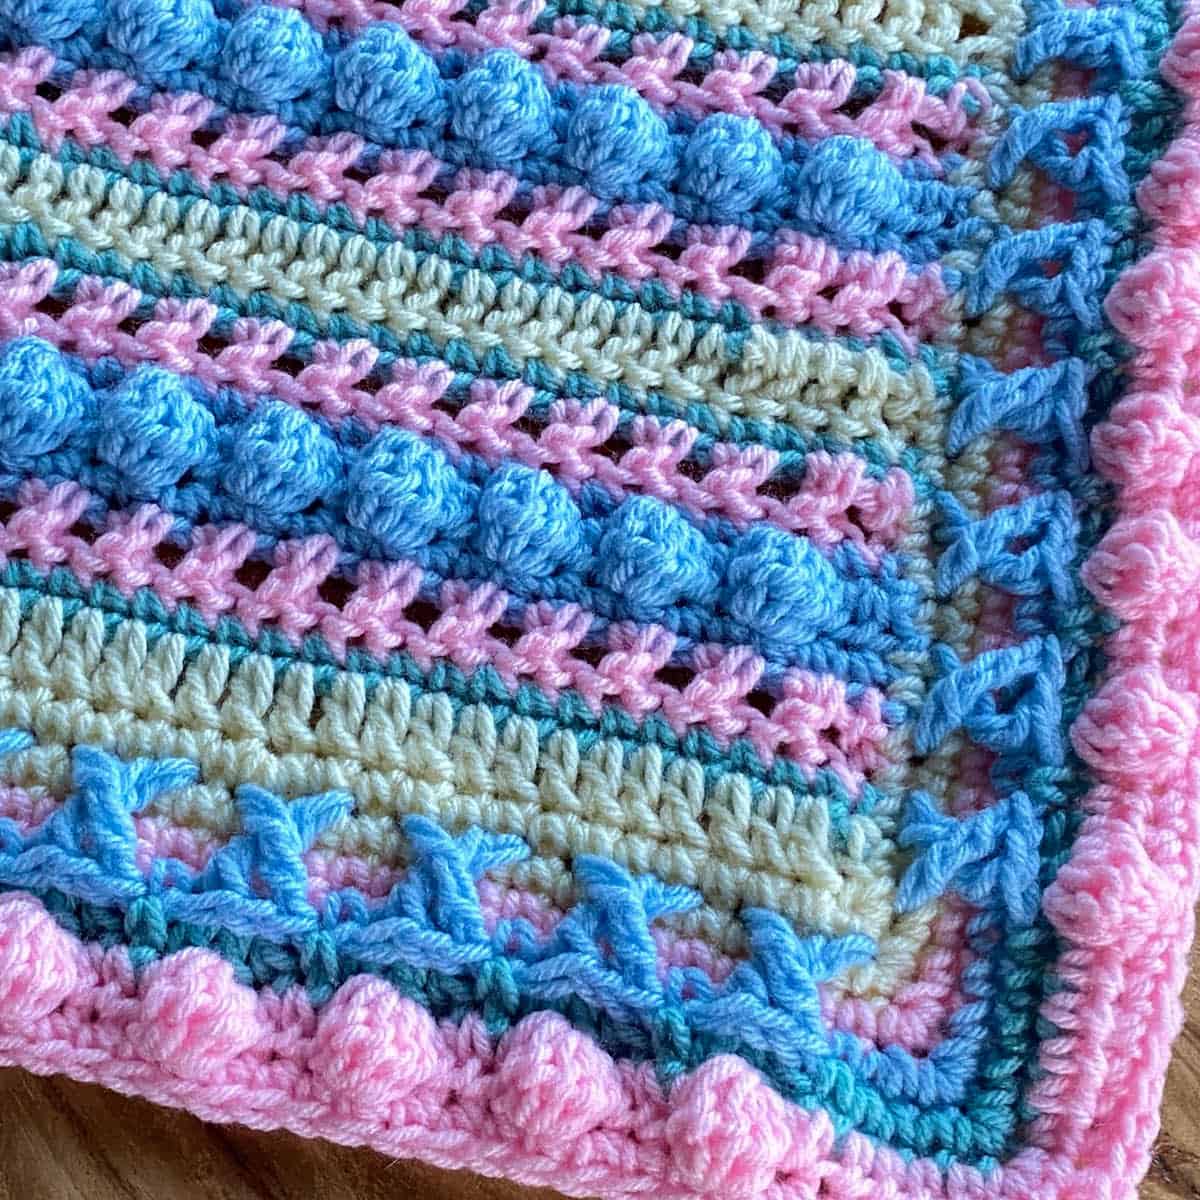 Little Boy Blue Updated Baby Crochet Blanket with Color